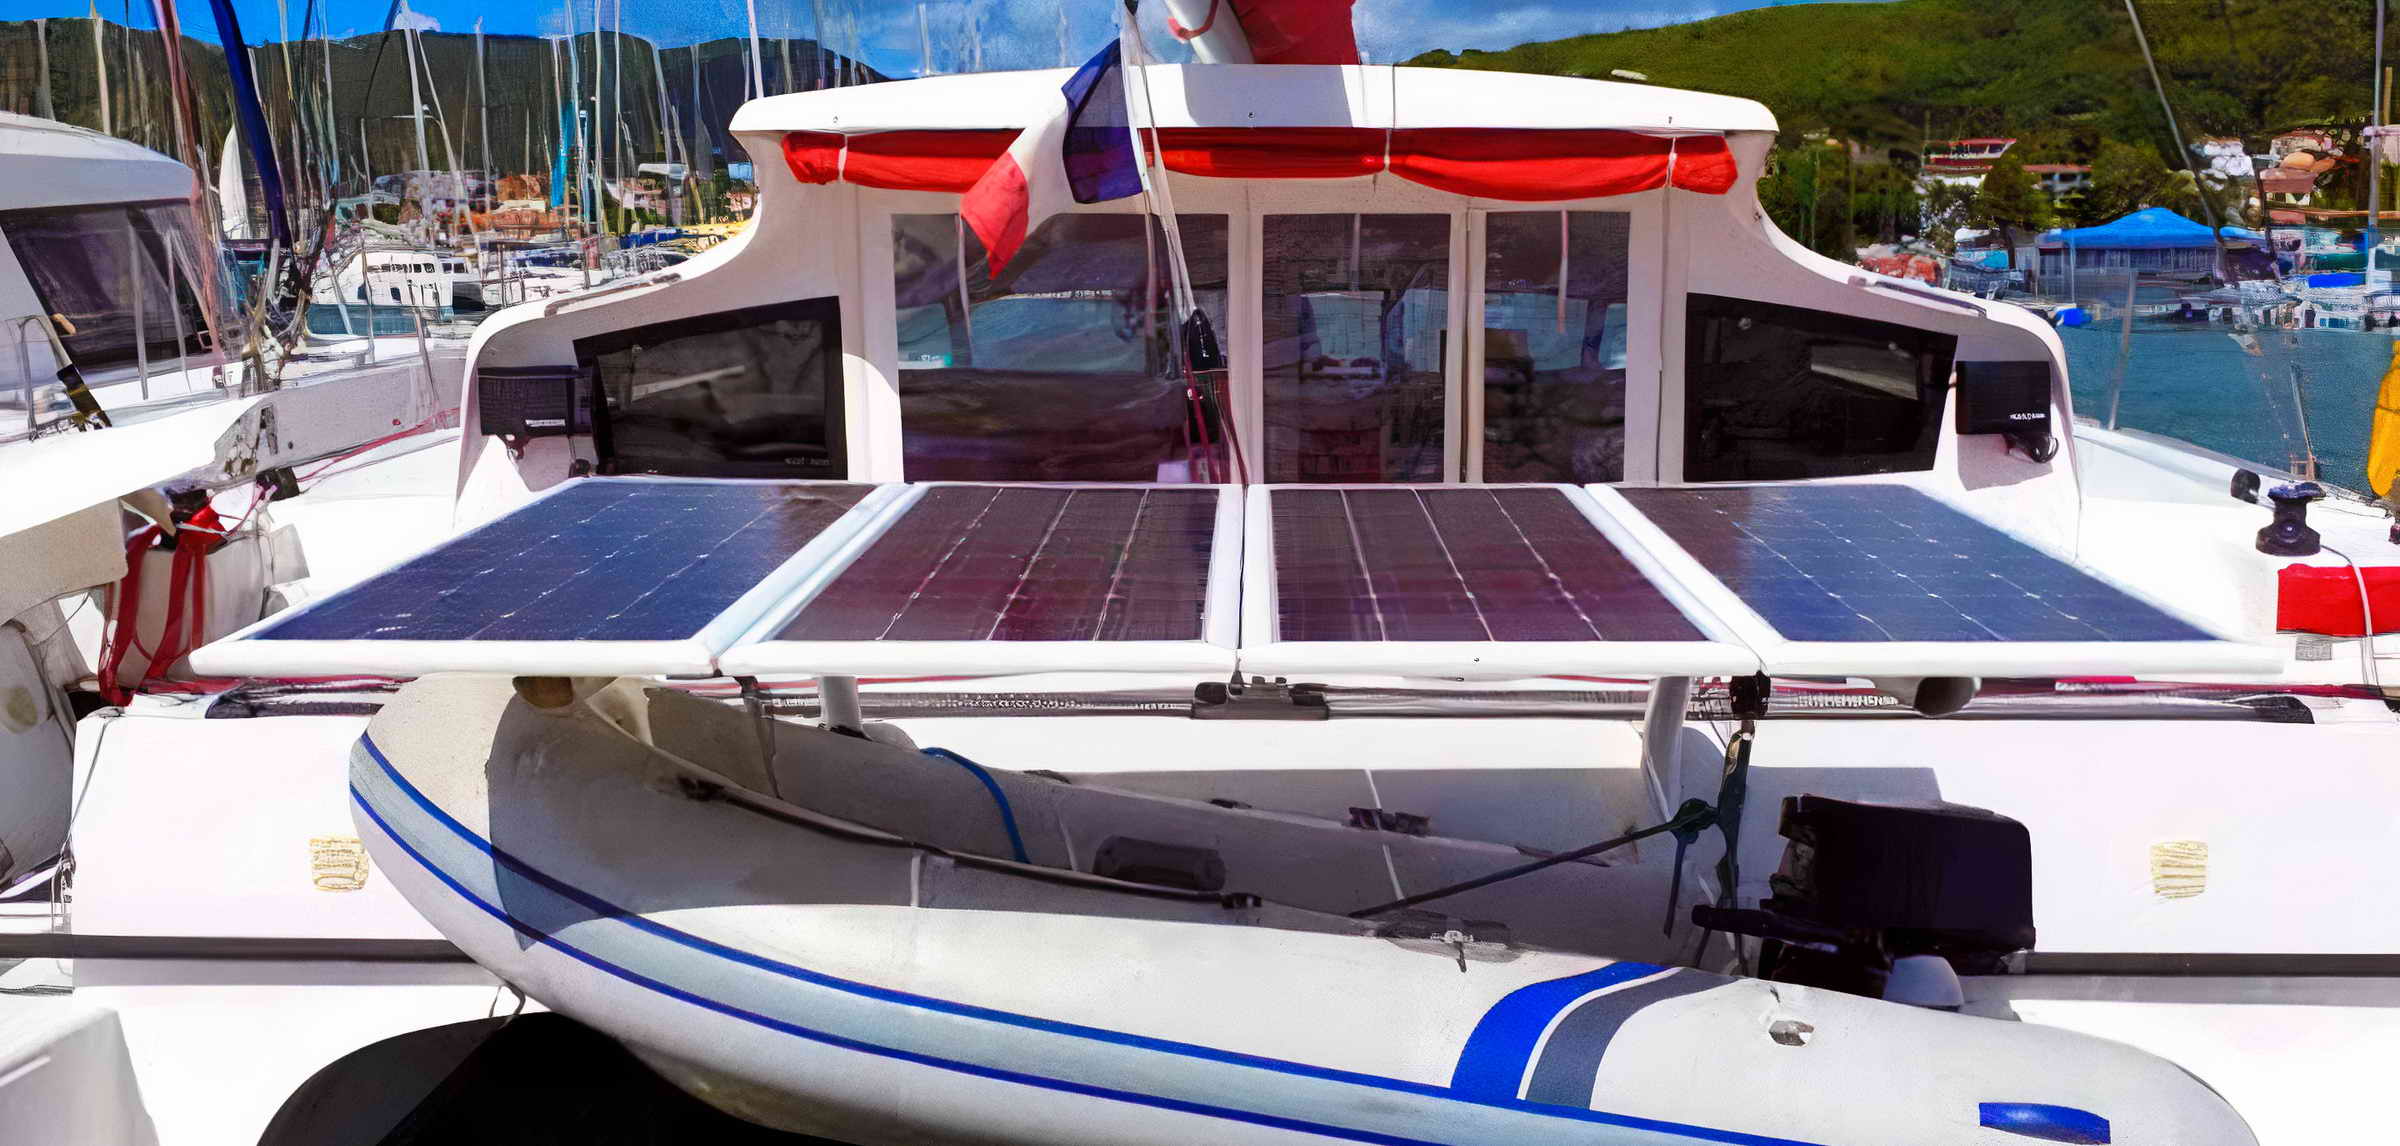 Yachts Powered By Alternative Power Sources - Yachting Future